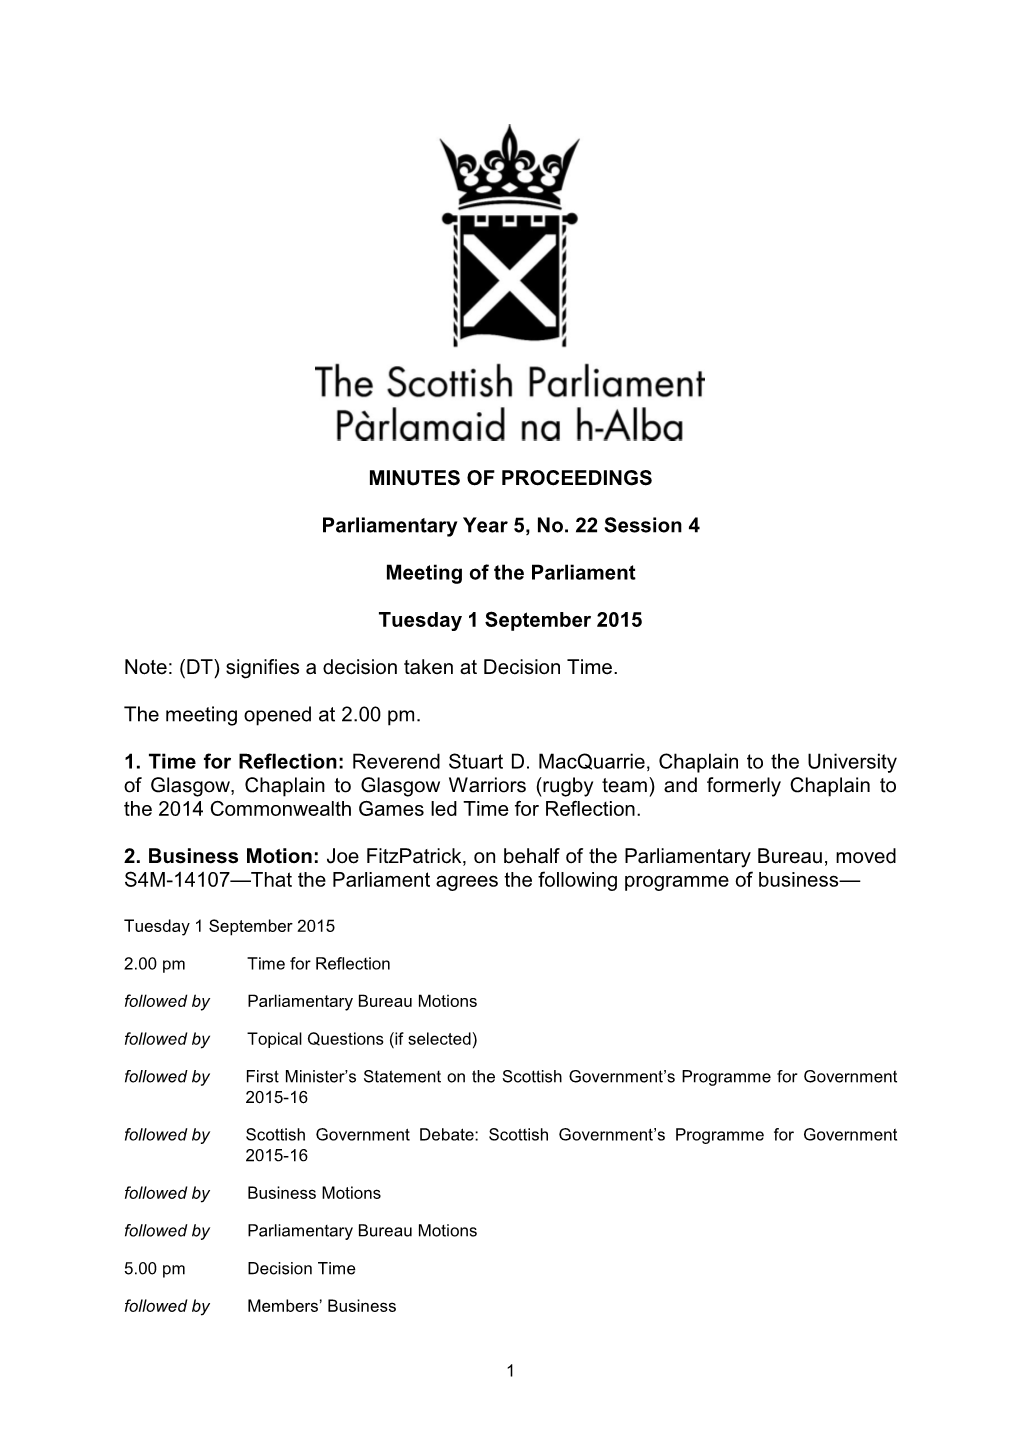 MINUTES of PROCEEDINGS Parliamentary Year 5, No. 22